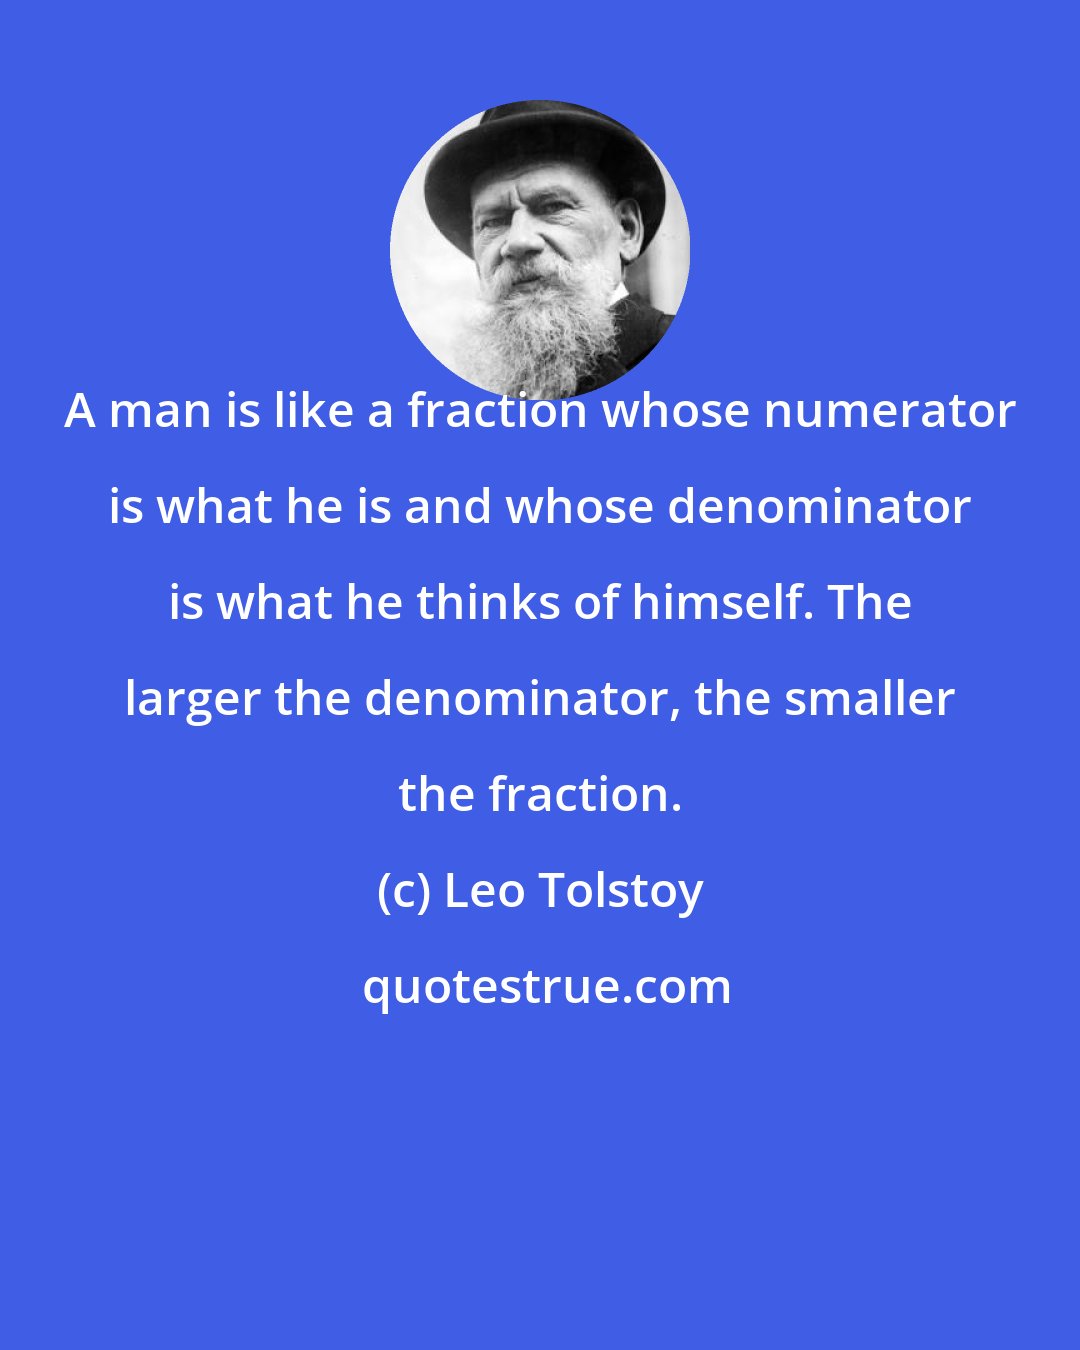 Leo Tolstoy: A man is like a fraction whose numerator is what he is and whose denominator is what he thinks of himself. The larger the denominator, the smaller the fraction.